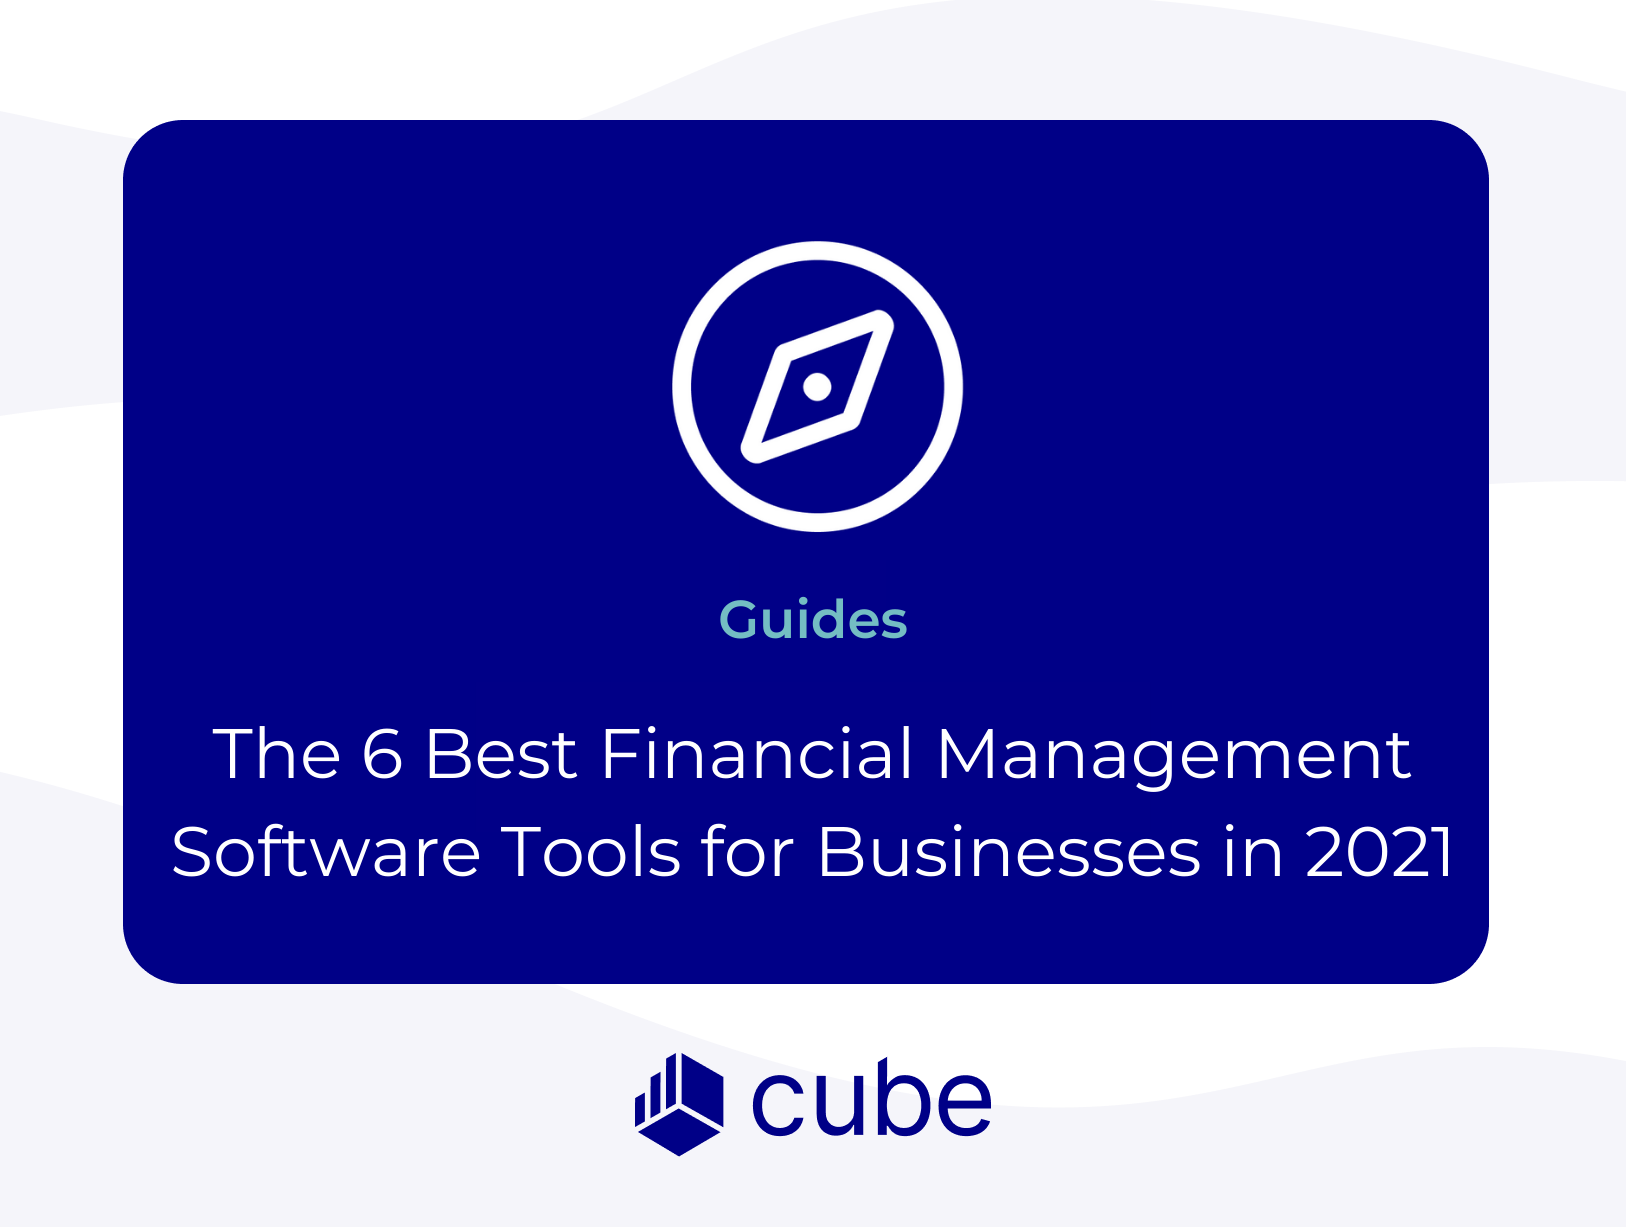 The 6 Best Financial Management Software Tools for Businesses in 2022